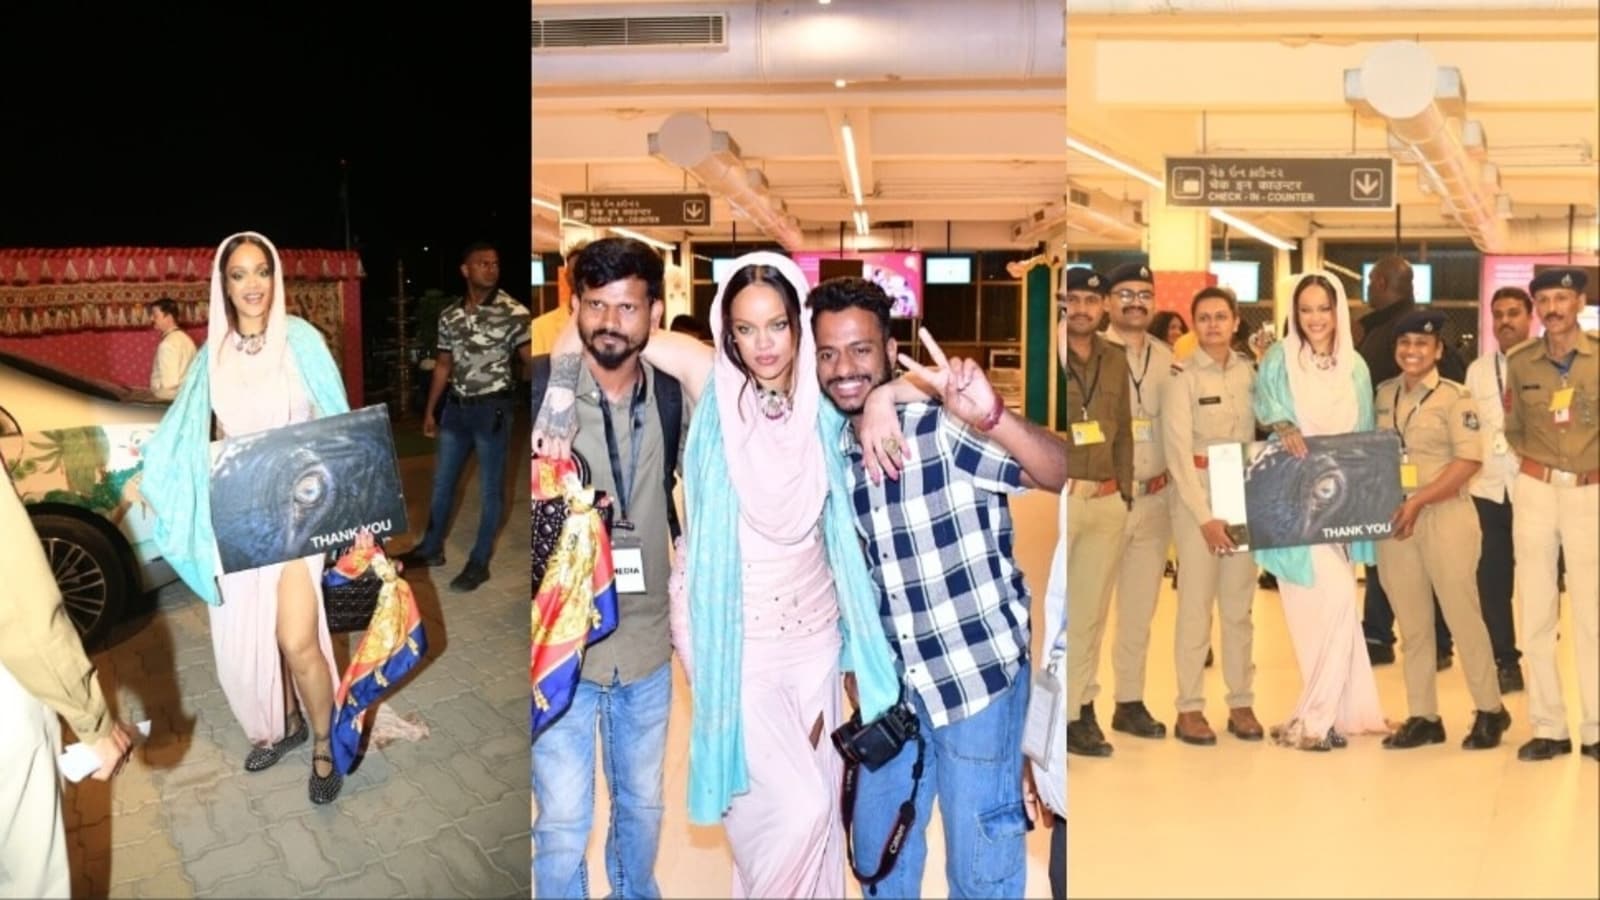 Rihanna poses with paparazzi and cops at Jamnagar airport, interacts with them before leaving India. Watch